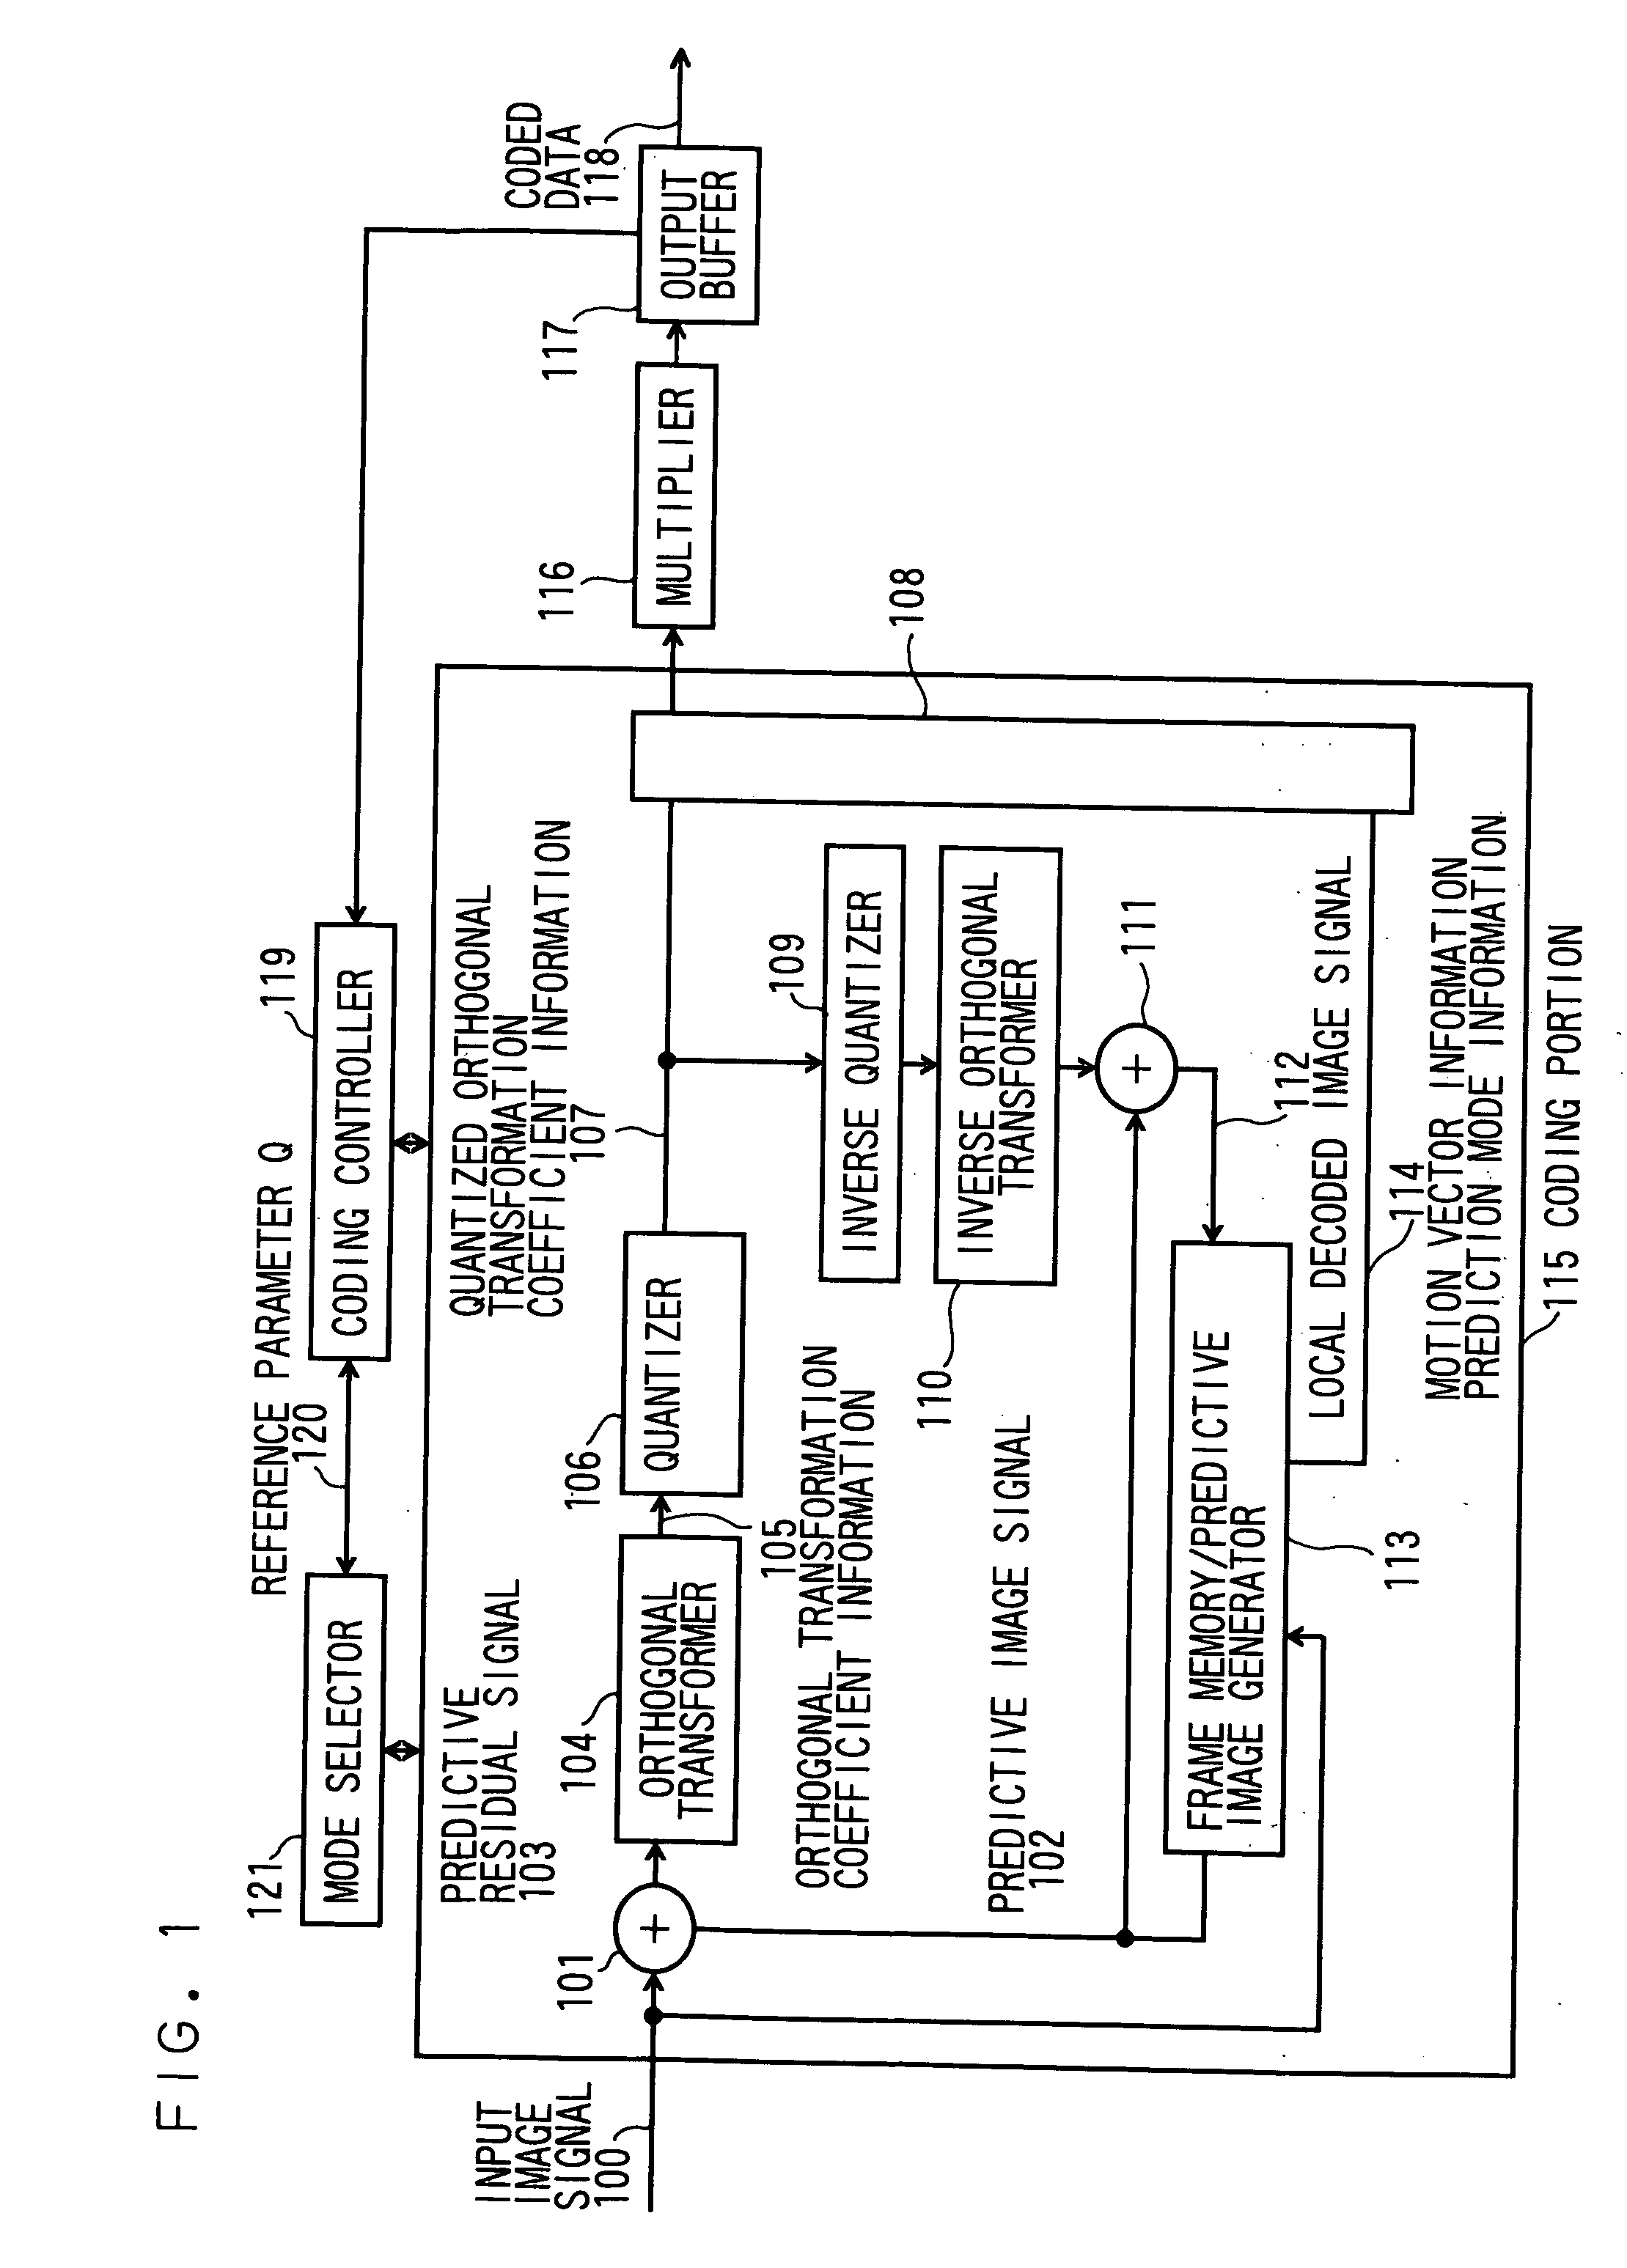 Image coding control method and device